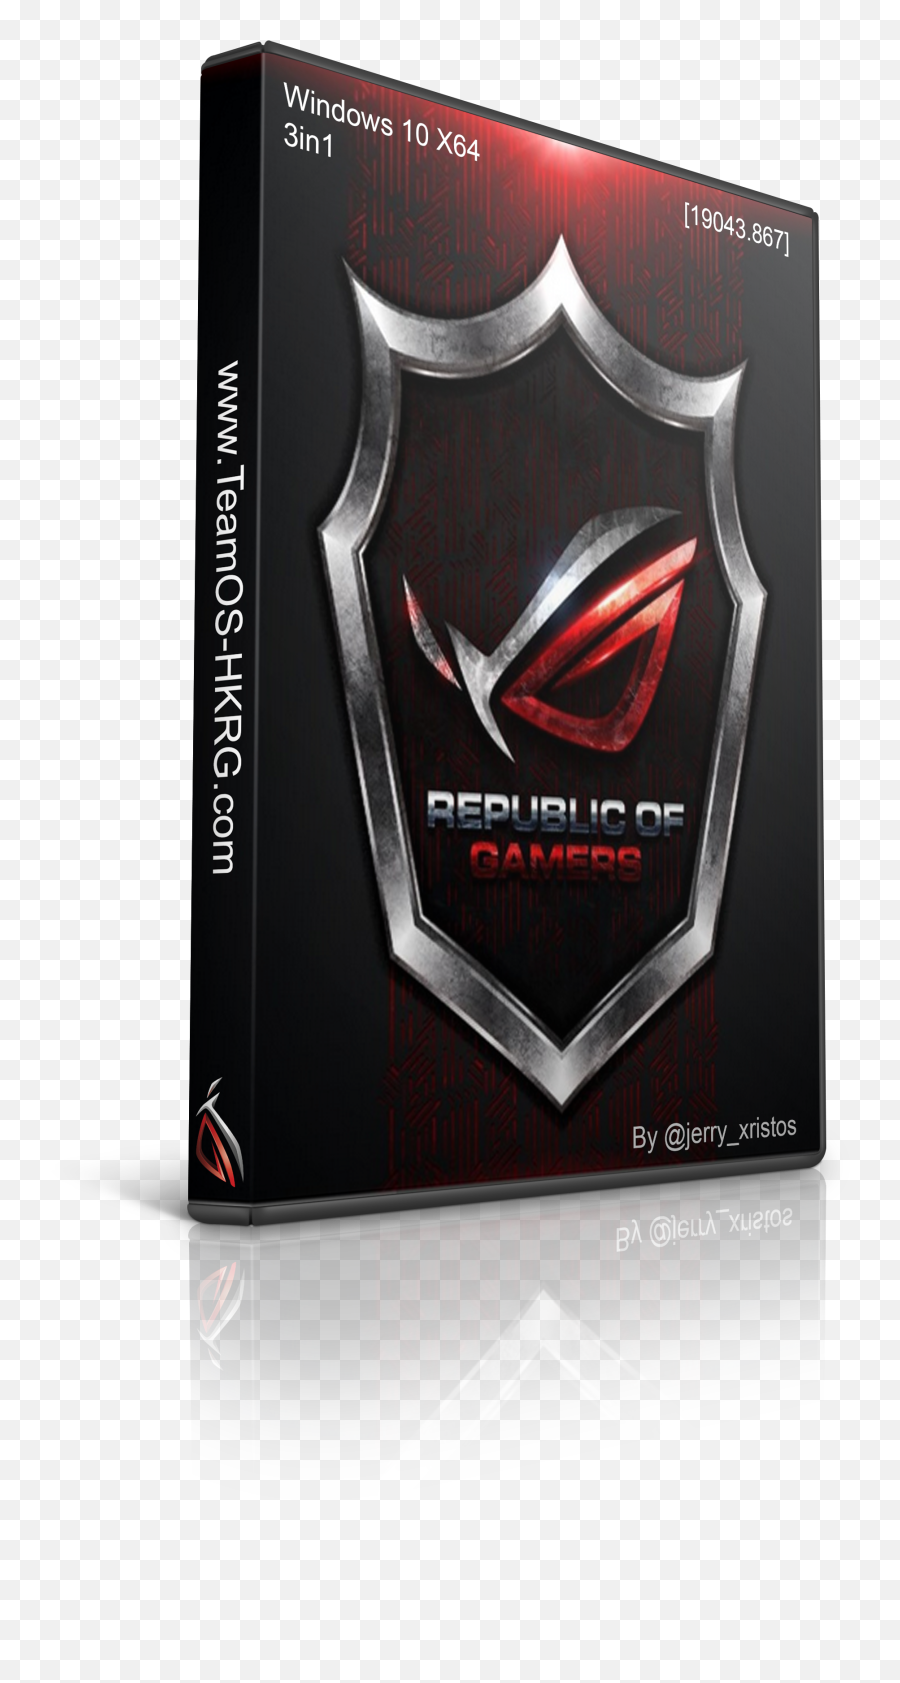 Rog - Republic Of Gamers Windows 10 X64 3in1 Compact Lite Emblem Png,Windows 10 Old Resycle Bin Icon